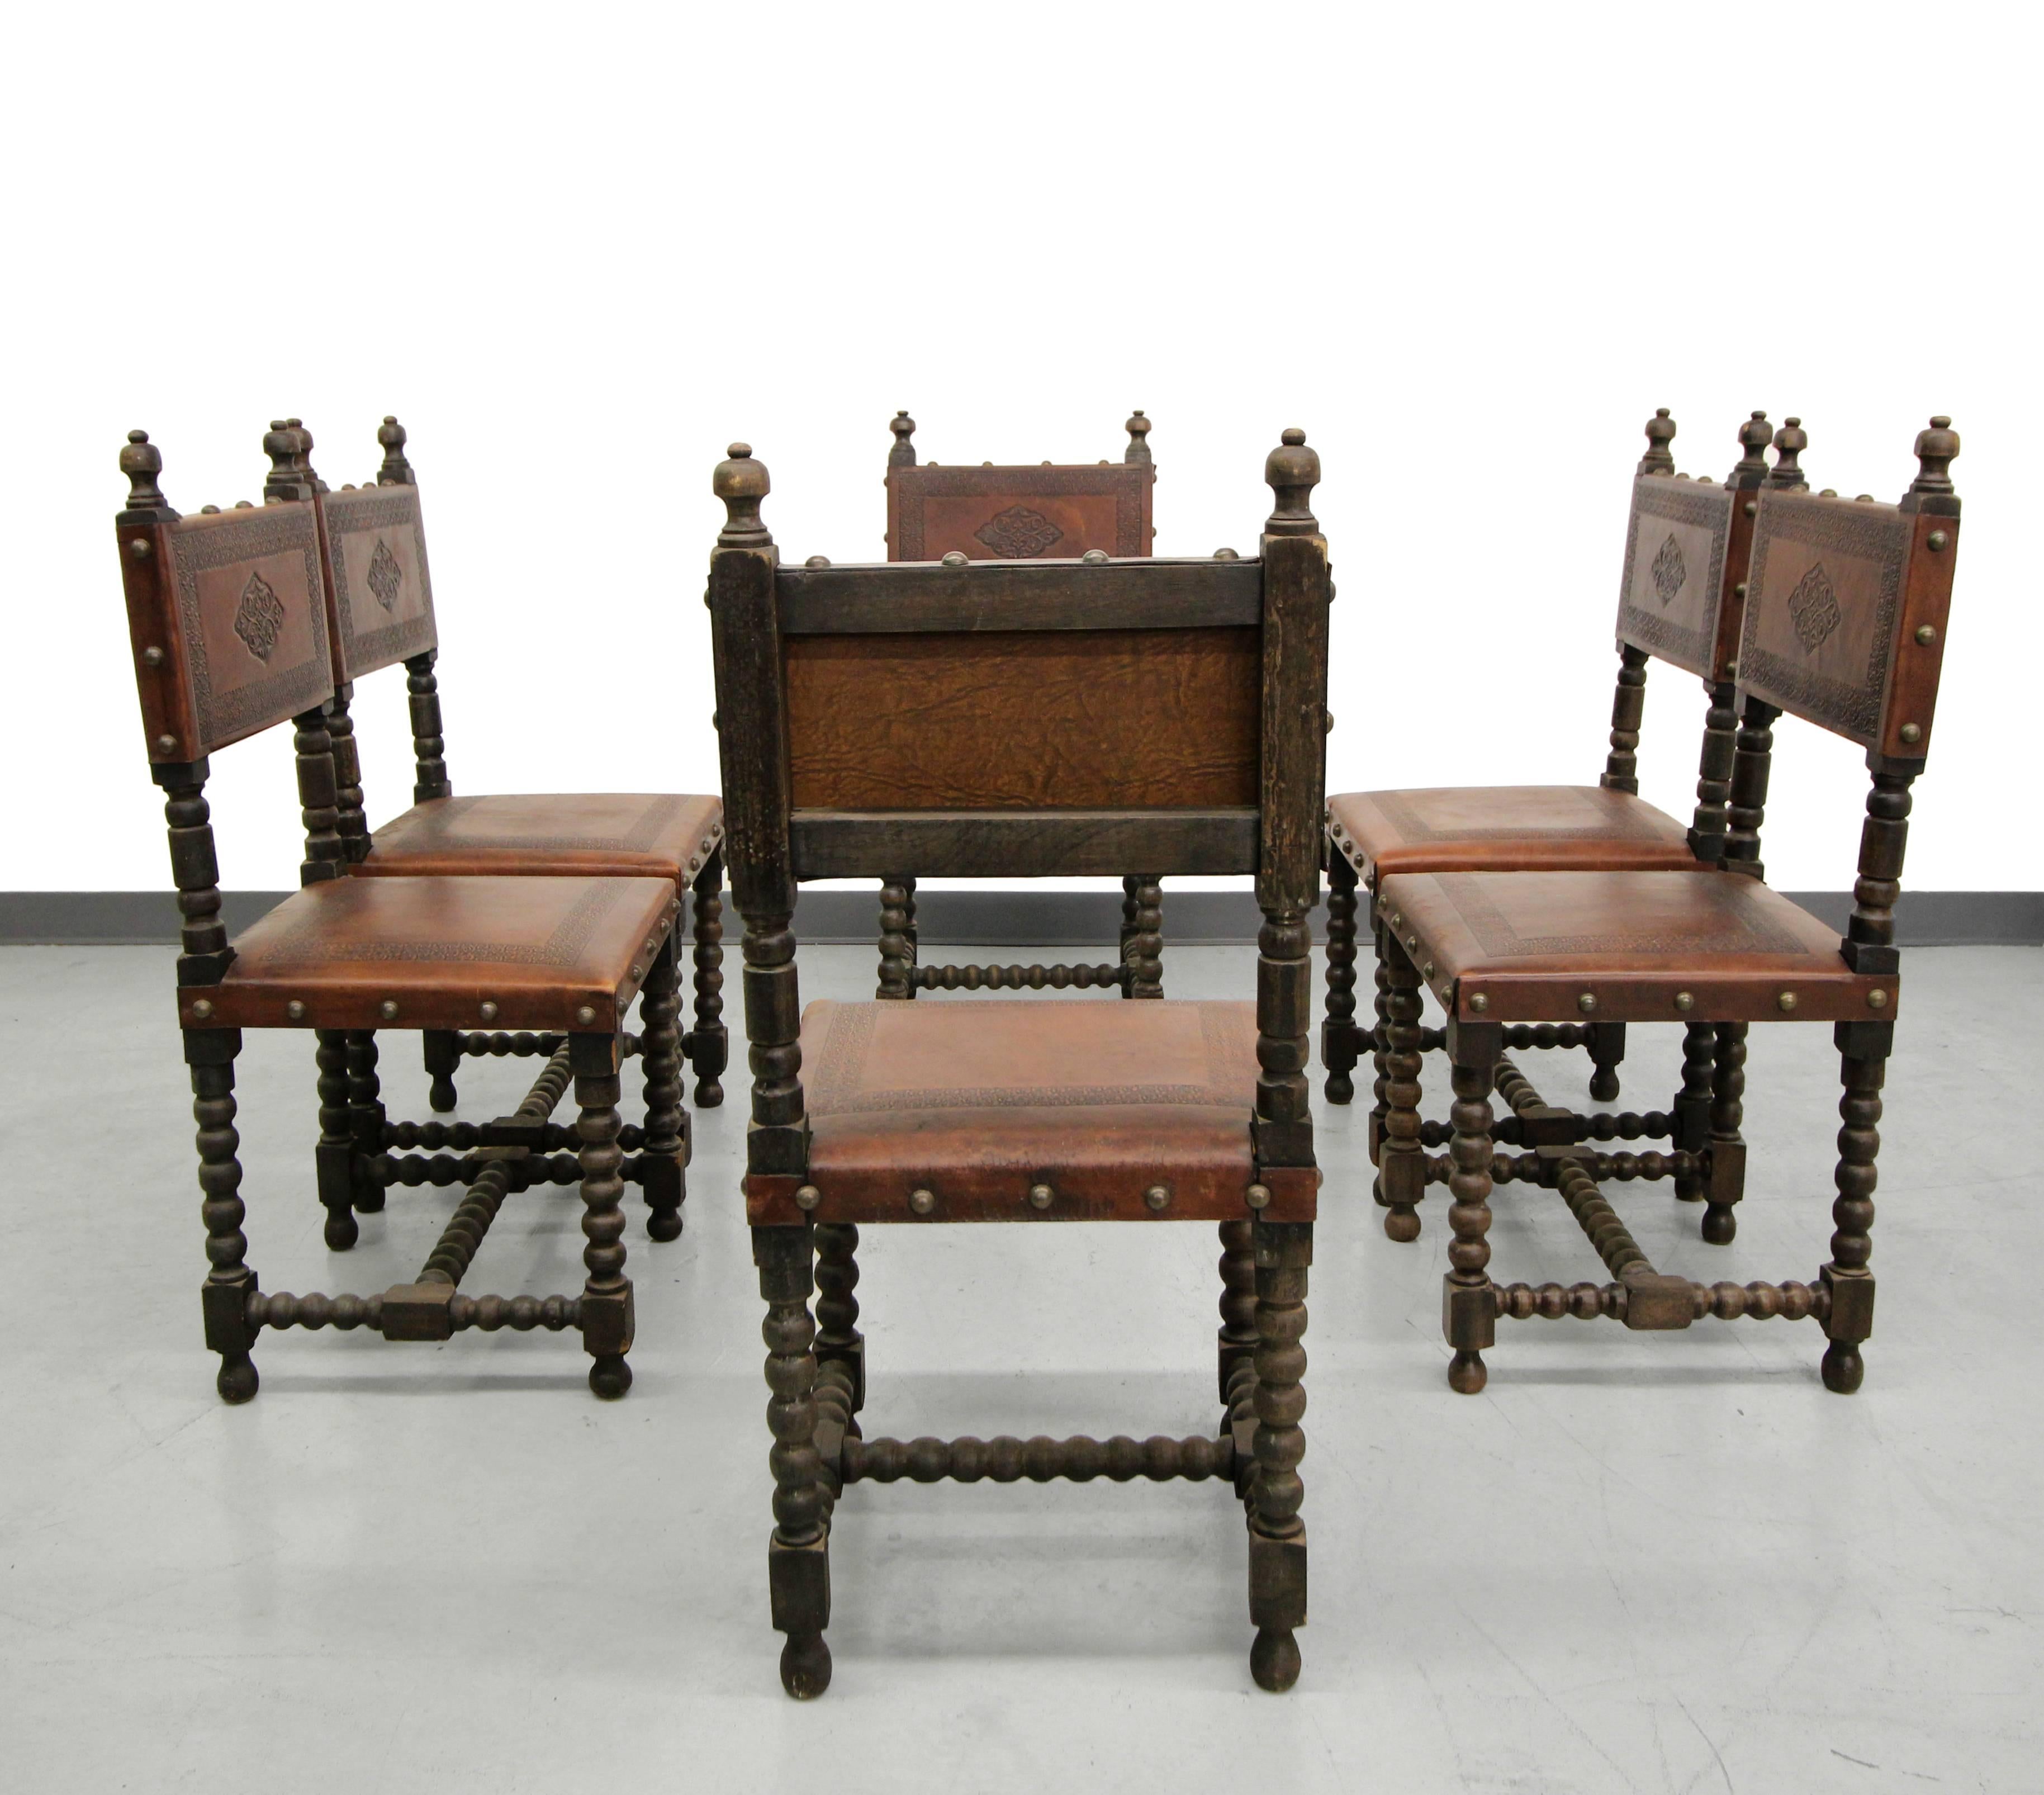 Gorgeous set of six early 20th century, antique Spanish Colonial dining chairs. These chairs feature beautiful stamped leather and hand-turned wood details with large brass tack details. Would be perfect in an eclectic or Industrial decor.

These